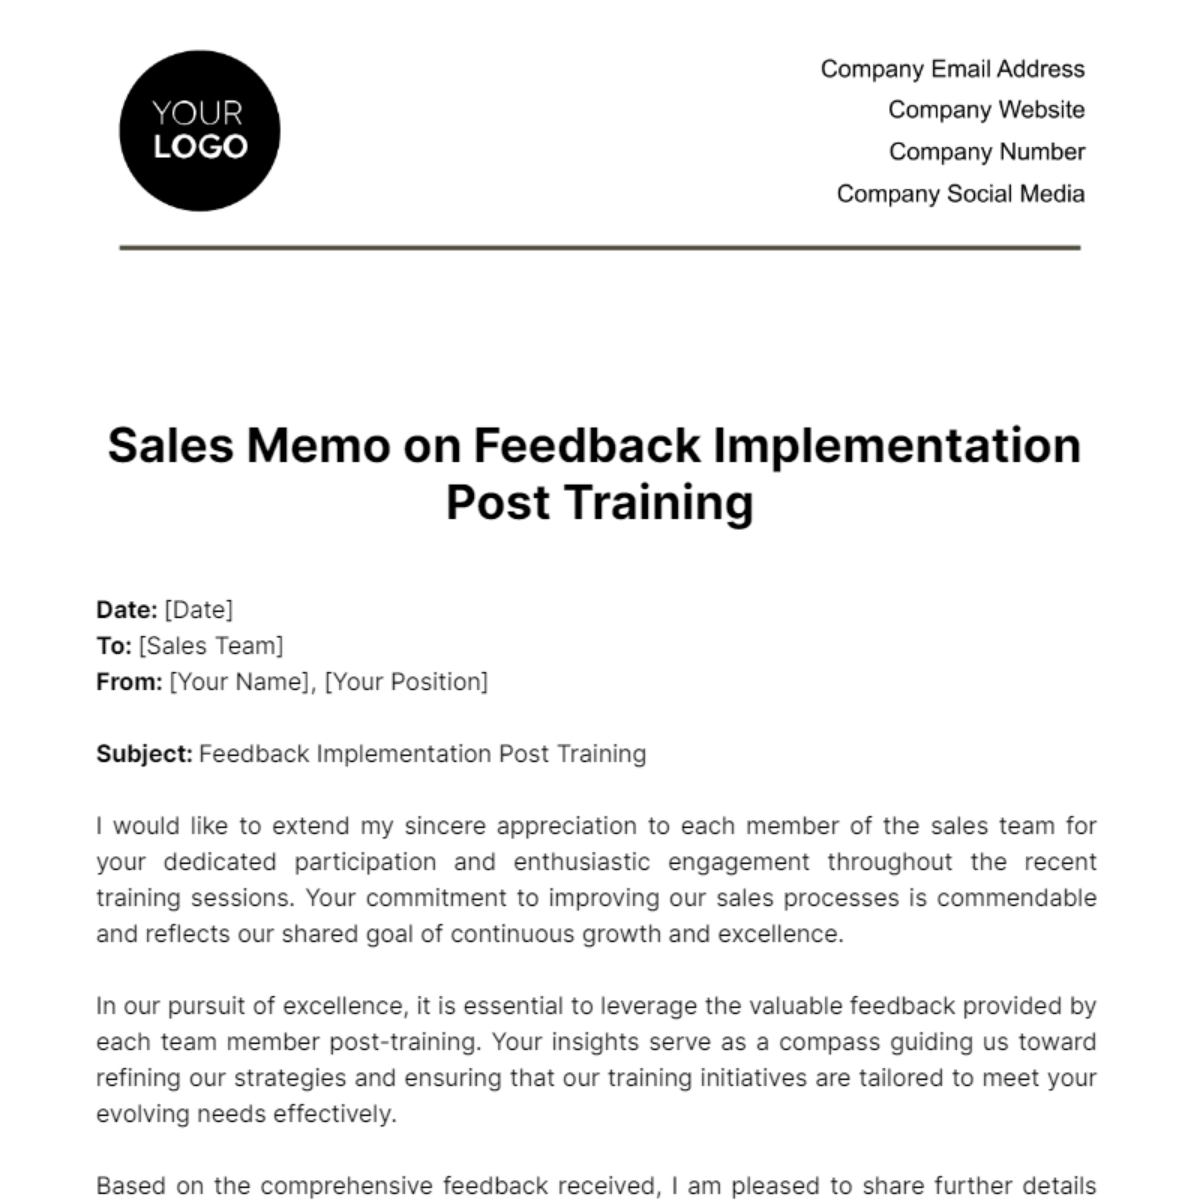 Sales Memo on Feedback Implementation Post Training Template